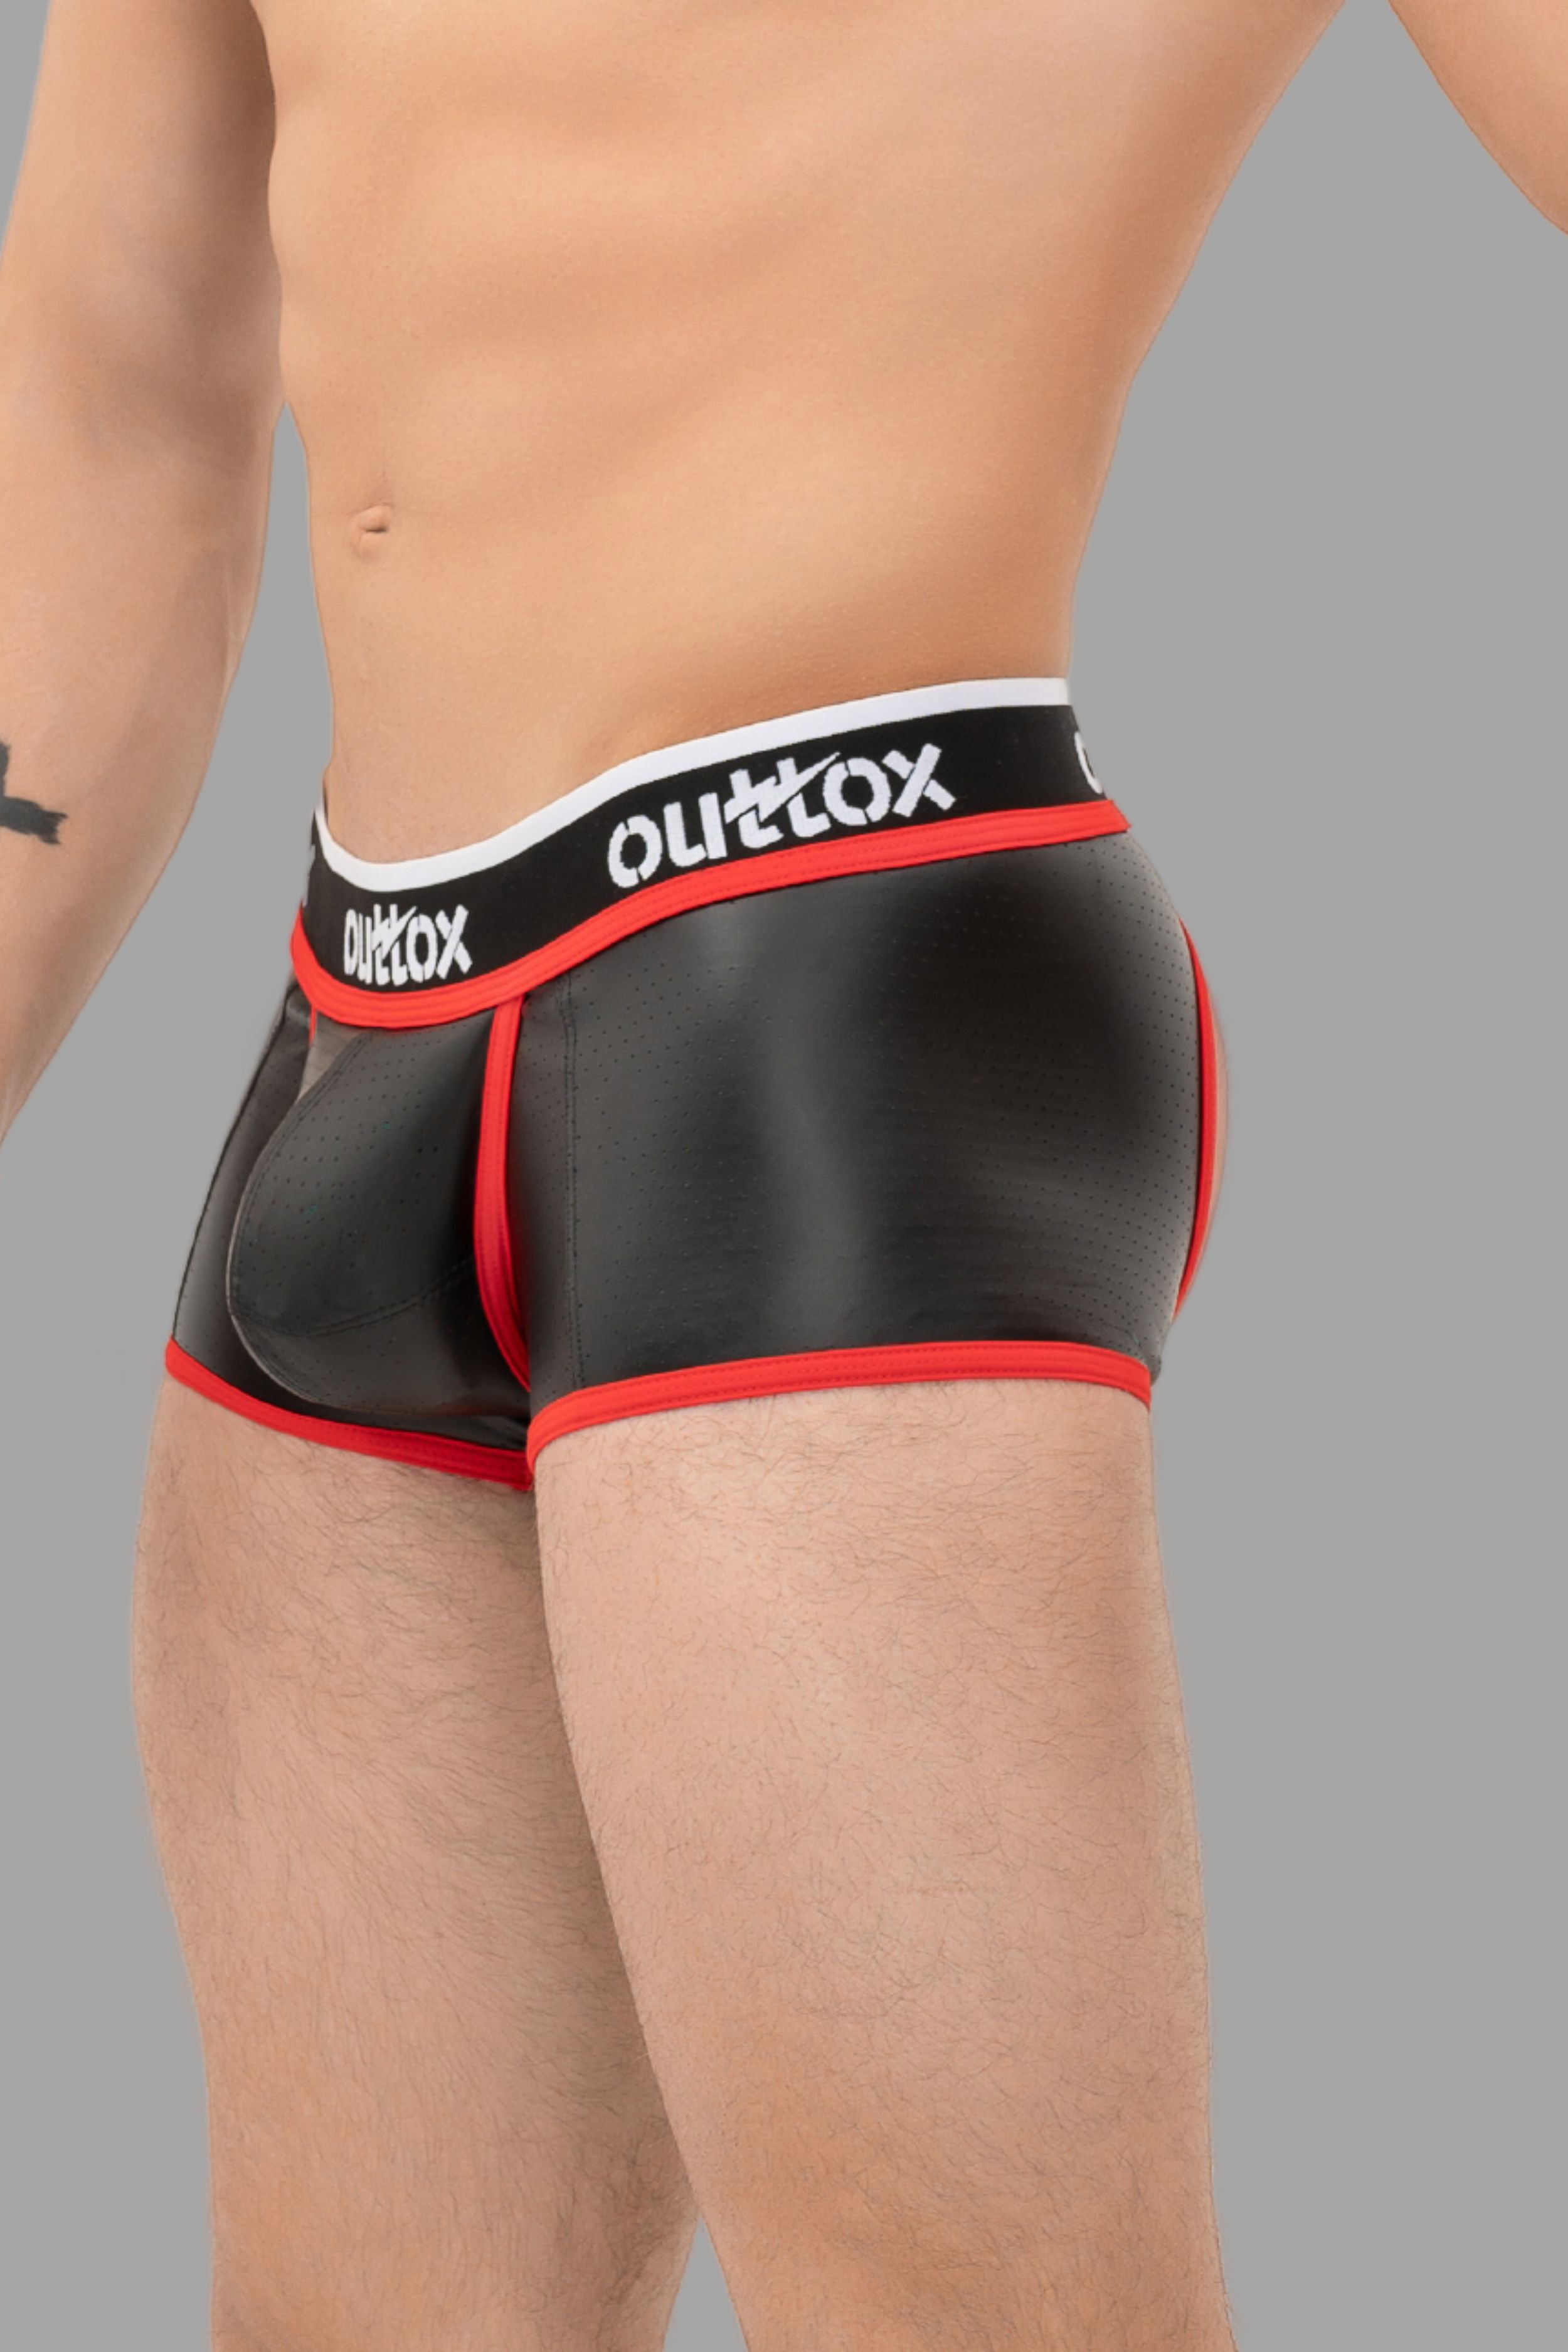 Outtox. Open Rear Trunk Shorts with Snap Codpiece. Black+Red